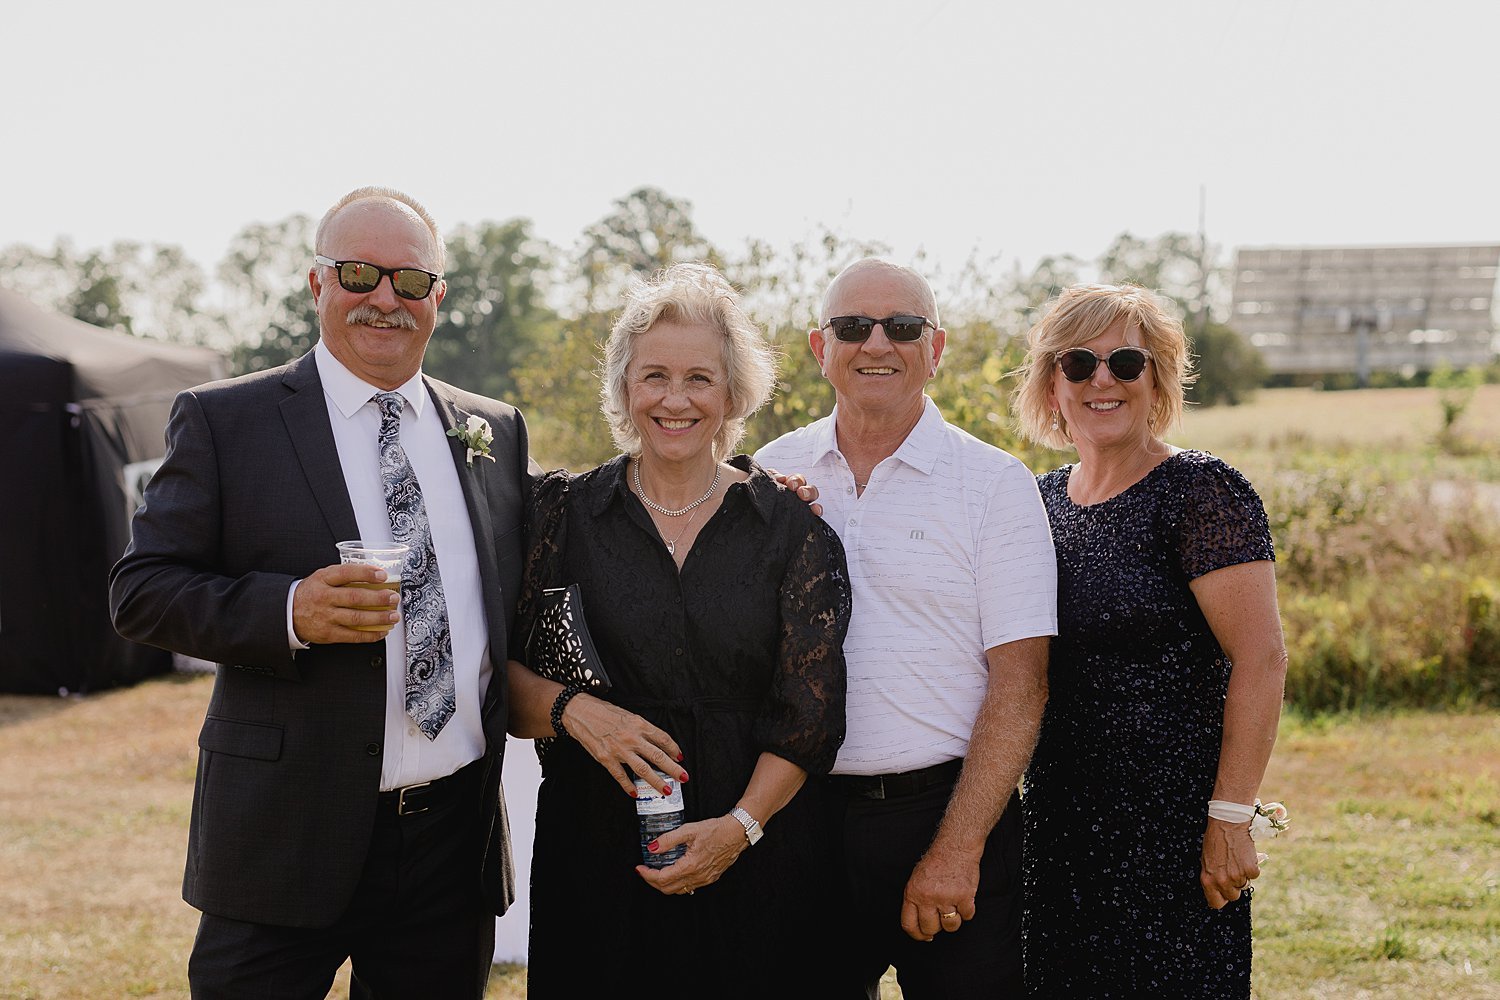 Large Wedding at The Old Third Winery | Prince Edward County Wedding Photographer | Holly McMurter Photographs_0142.jpg